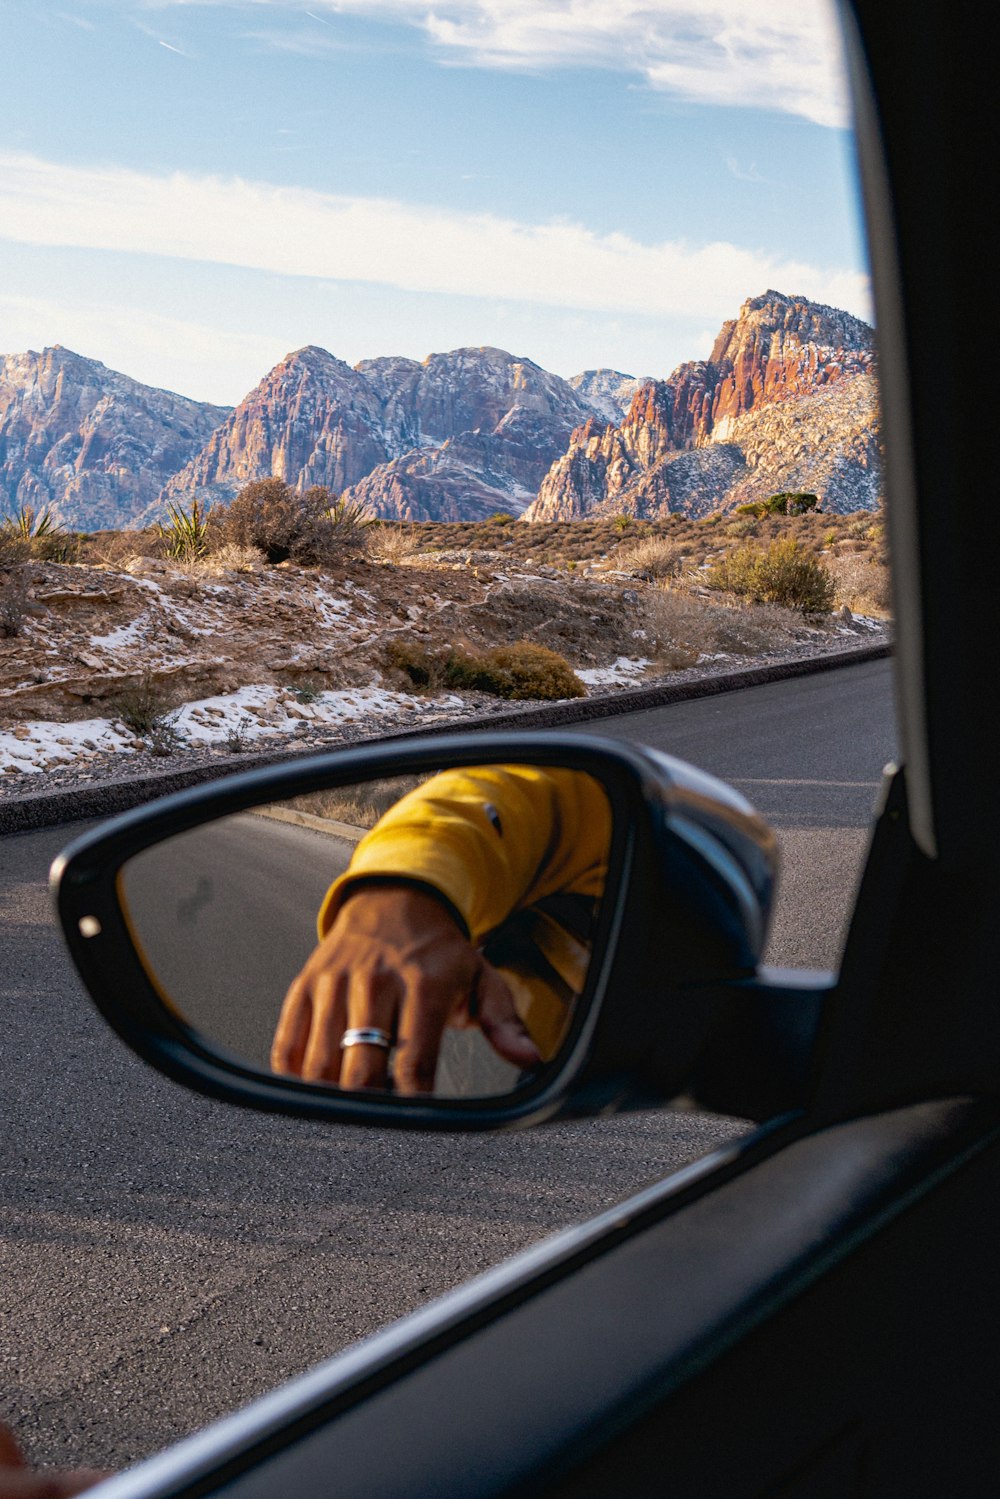 a person taking a picture of mountains in a rear view mirror